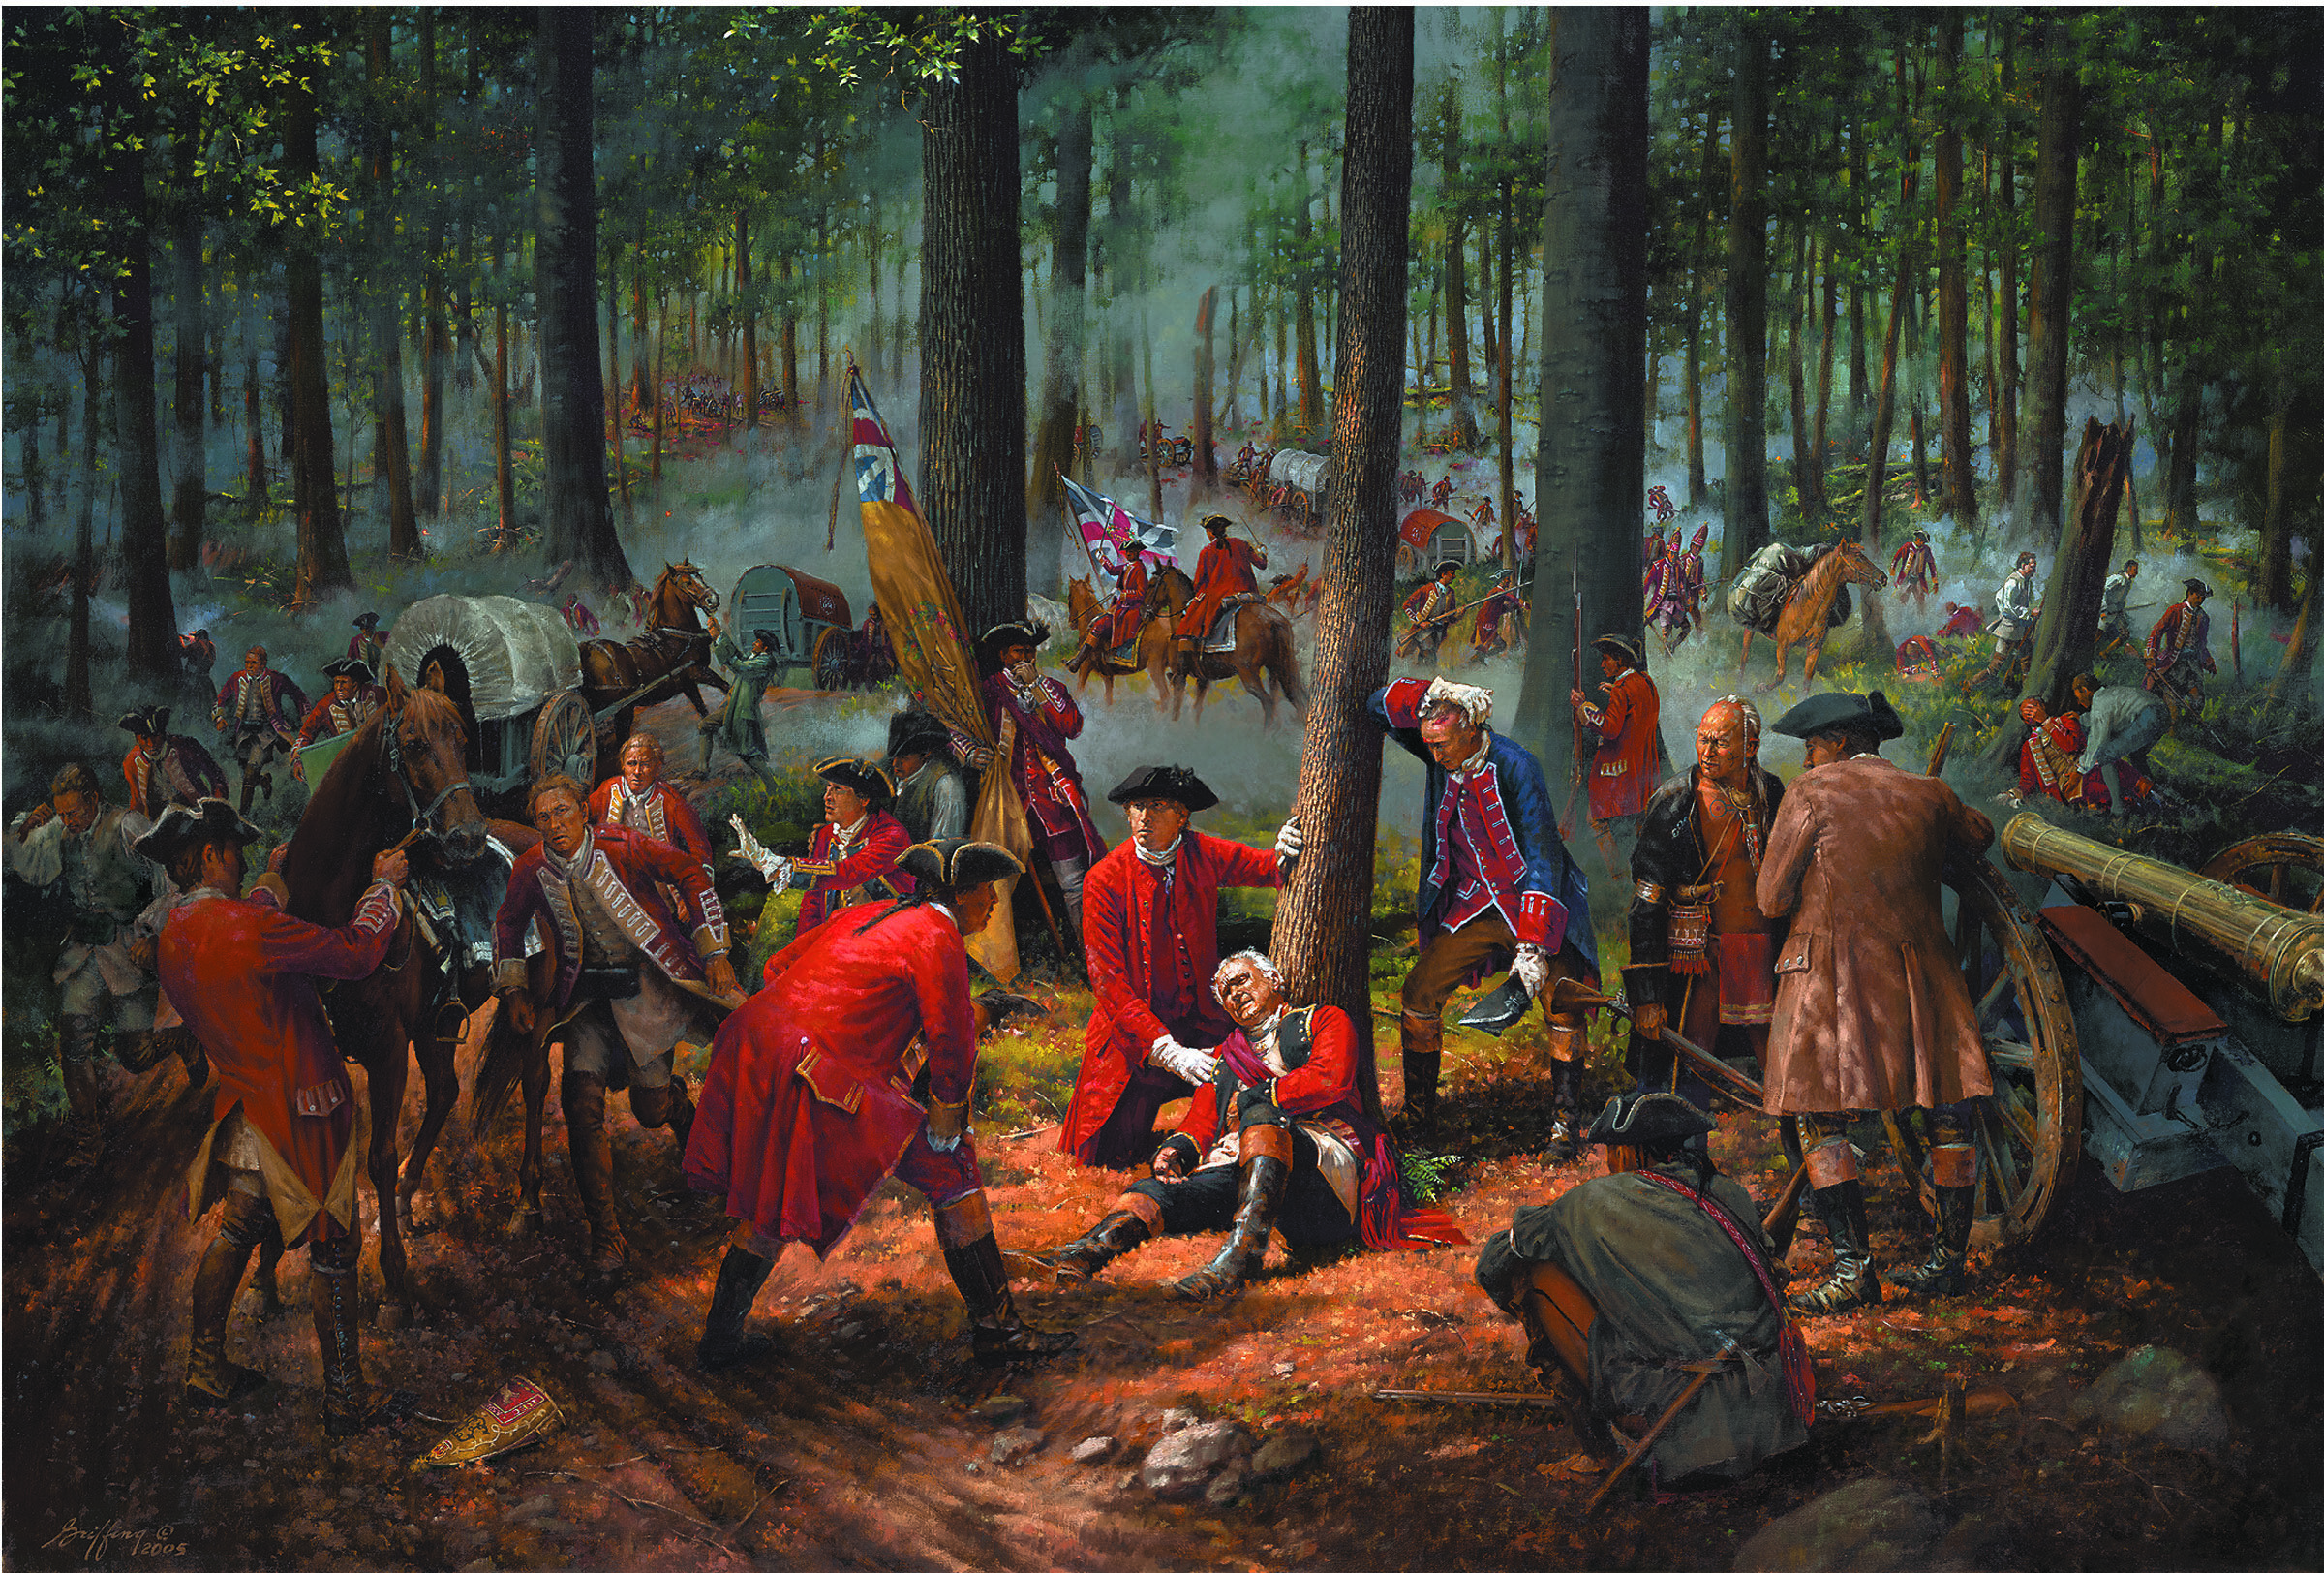 Robert Griffing (Linesville, PA 1940), The Wounding of General Braddock: Battle of the Monongahela 9 July 1755, 2005, Oil on Canvas, Gift of COLCOM Foundation.